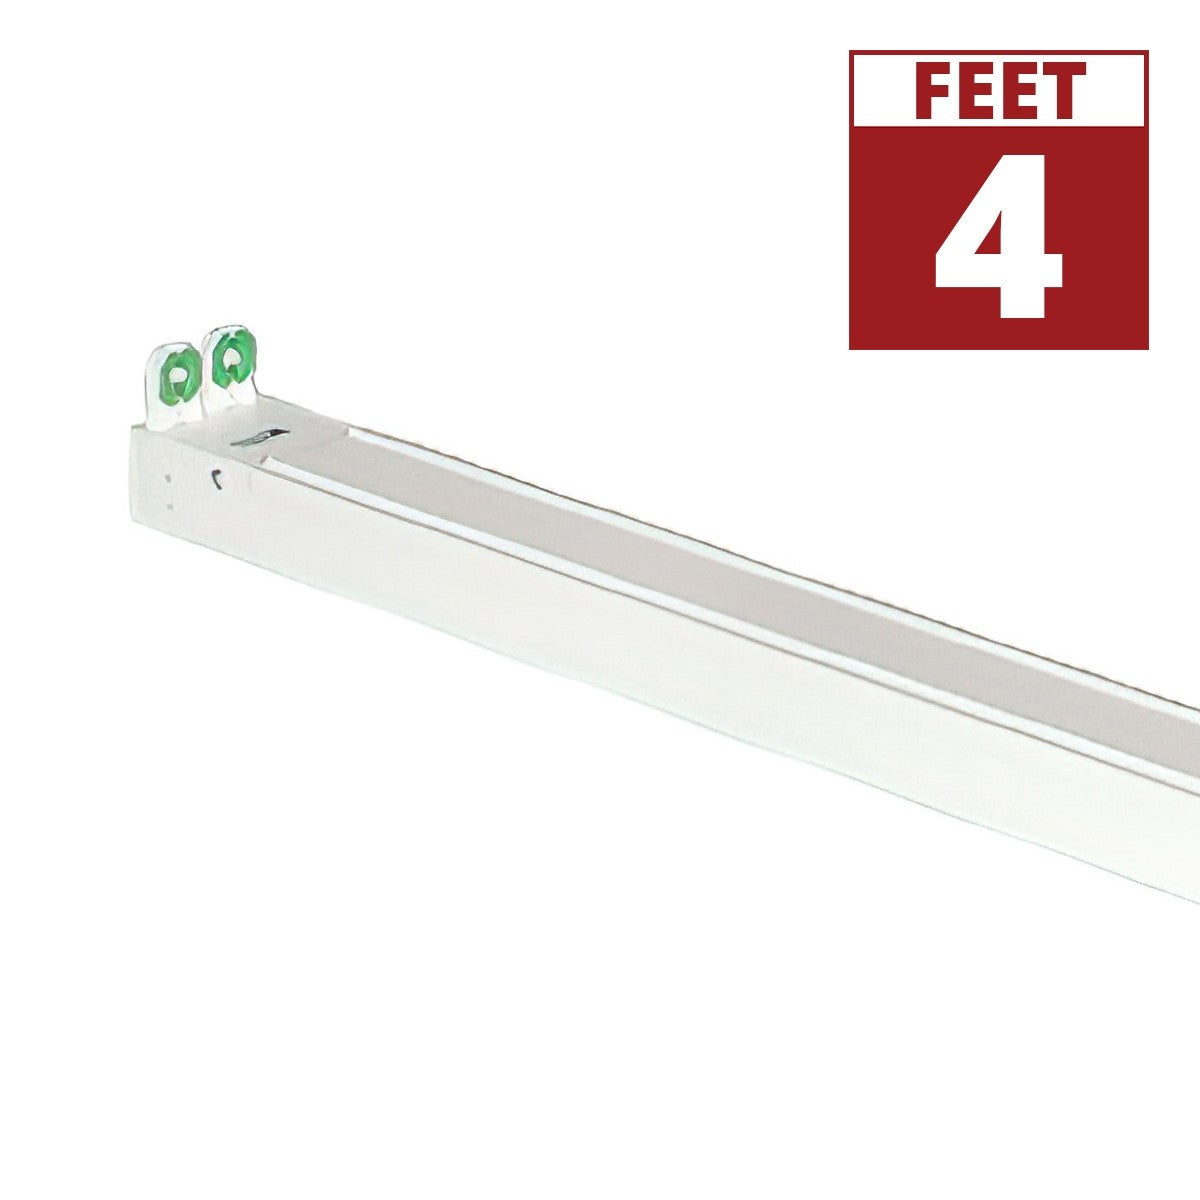 4ft LED Ready Strip Light 2-lamp Double End Wiring LED T5 Bulbs Not Included